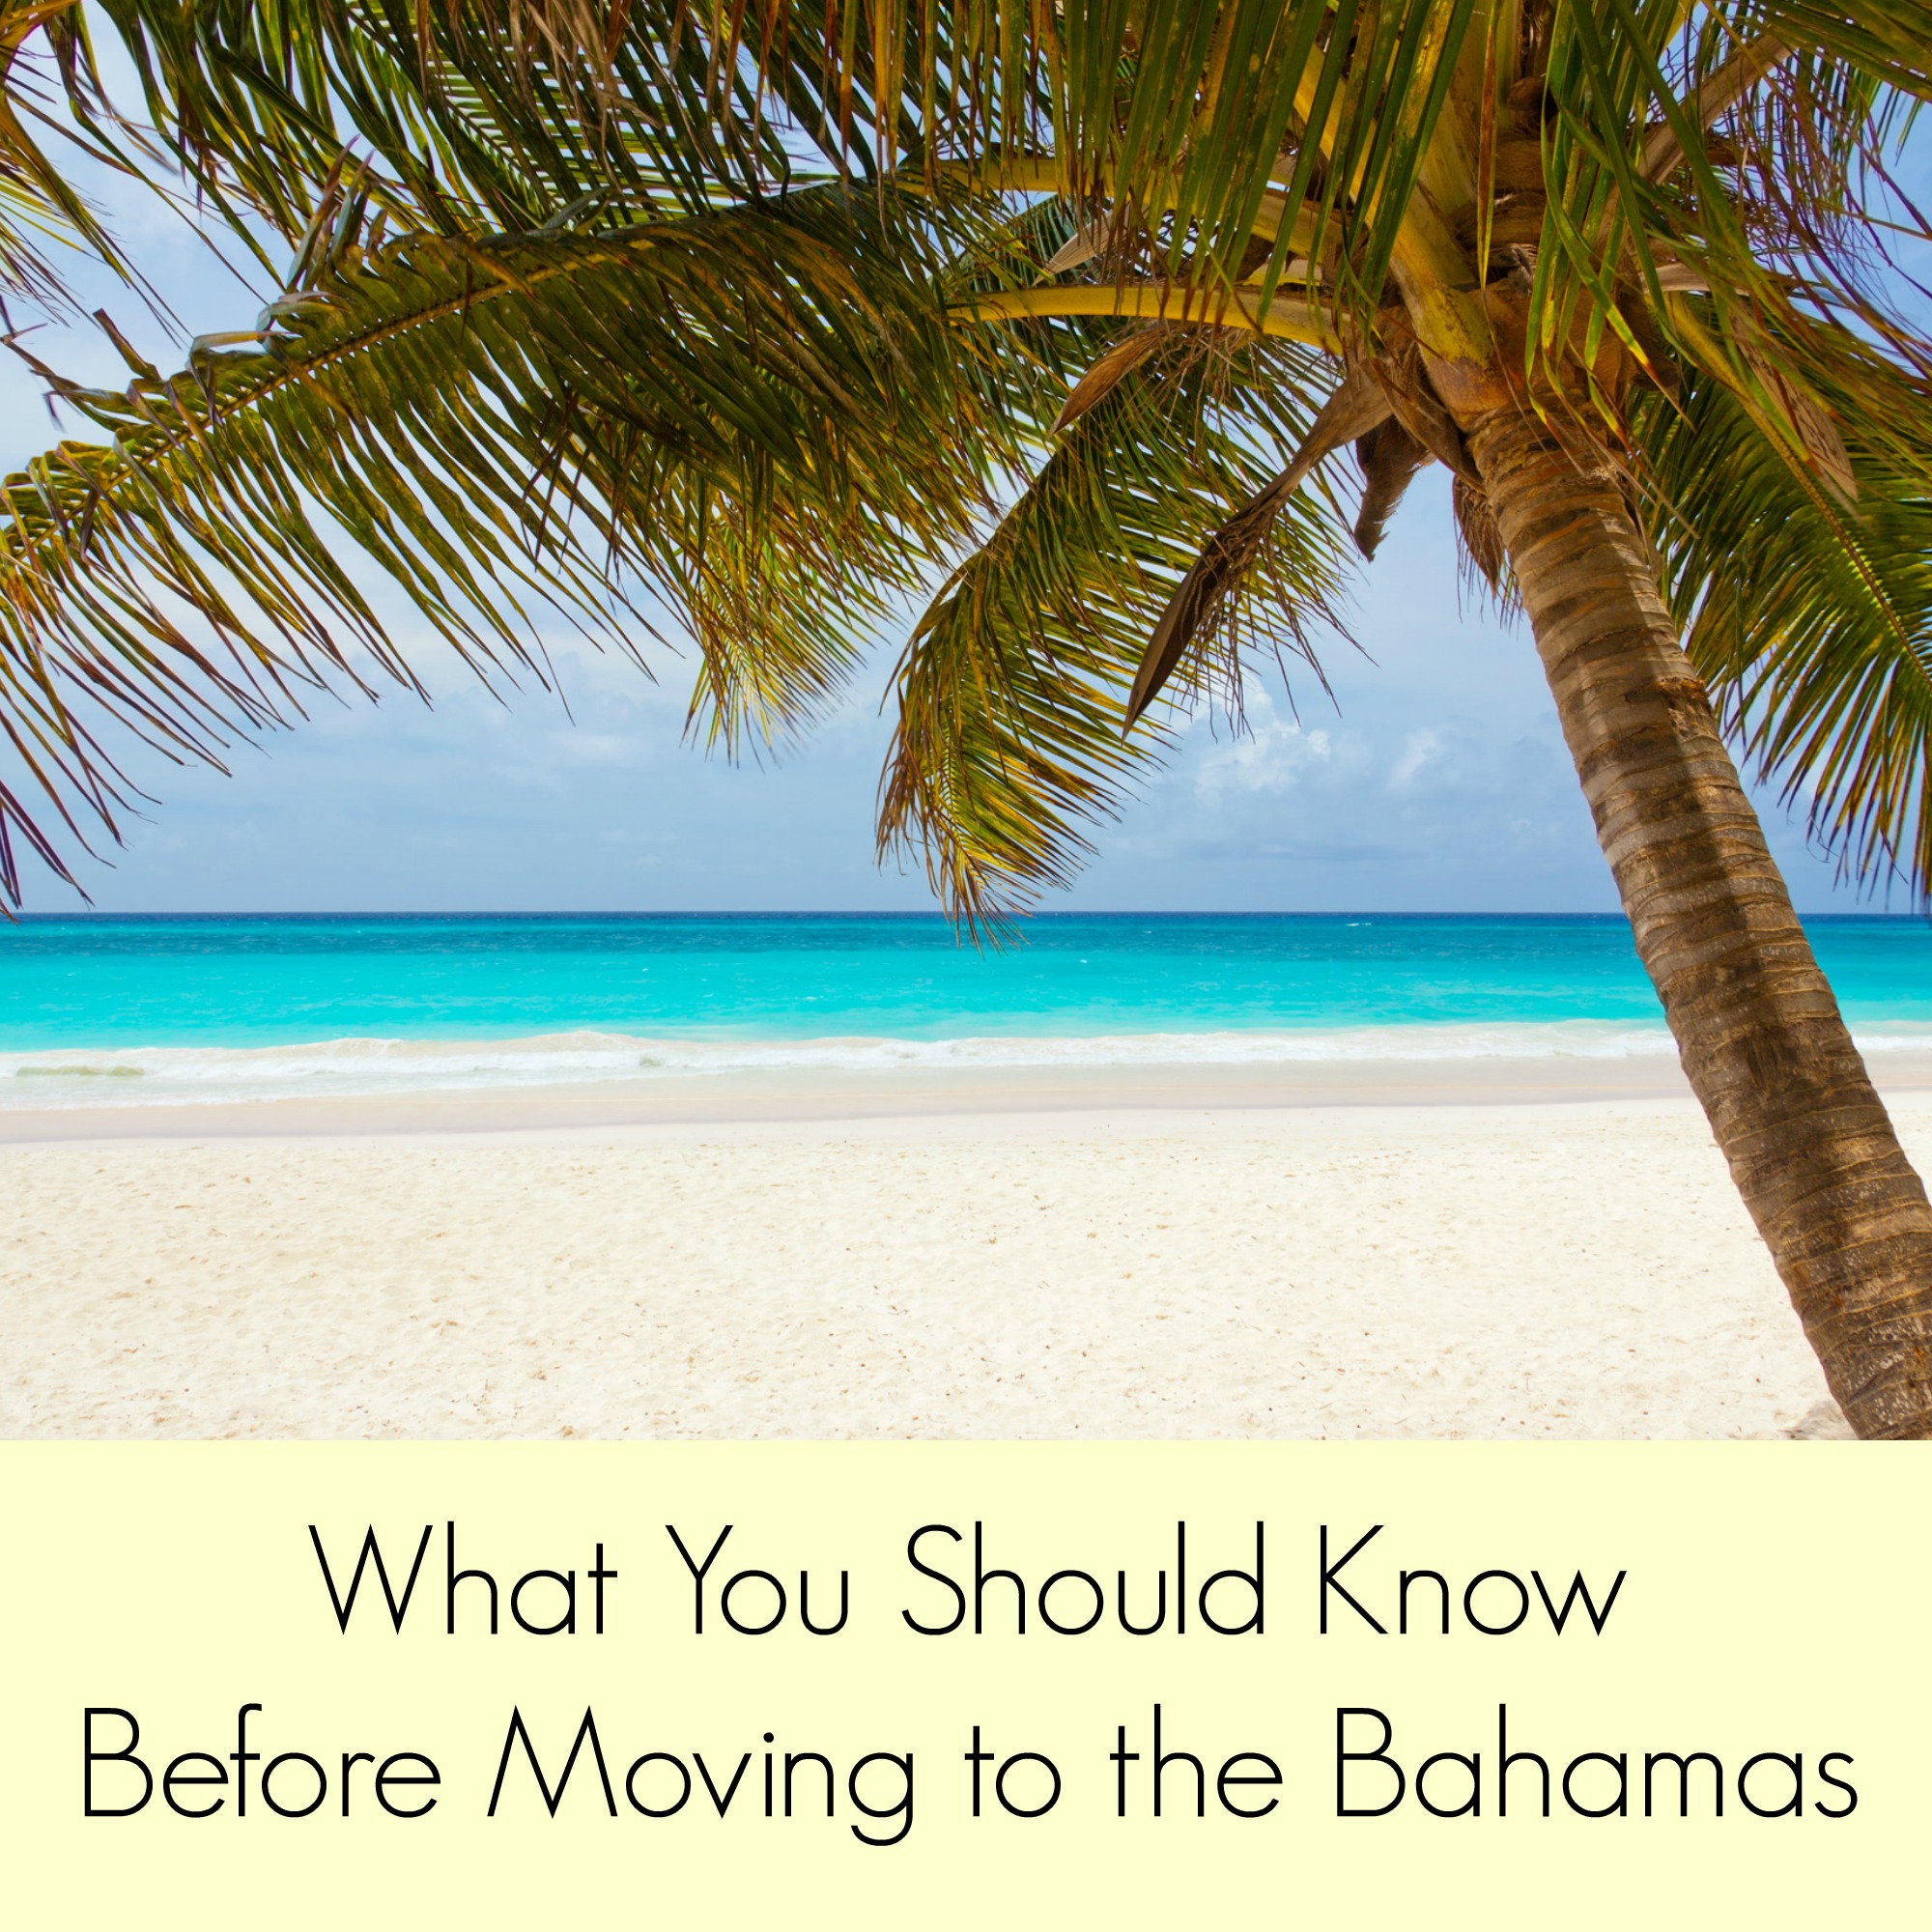 What You Should Know Before Moving to the Bahamas